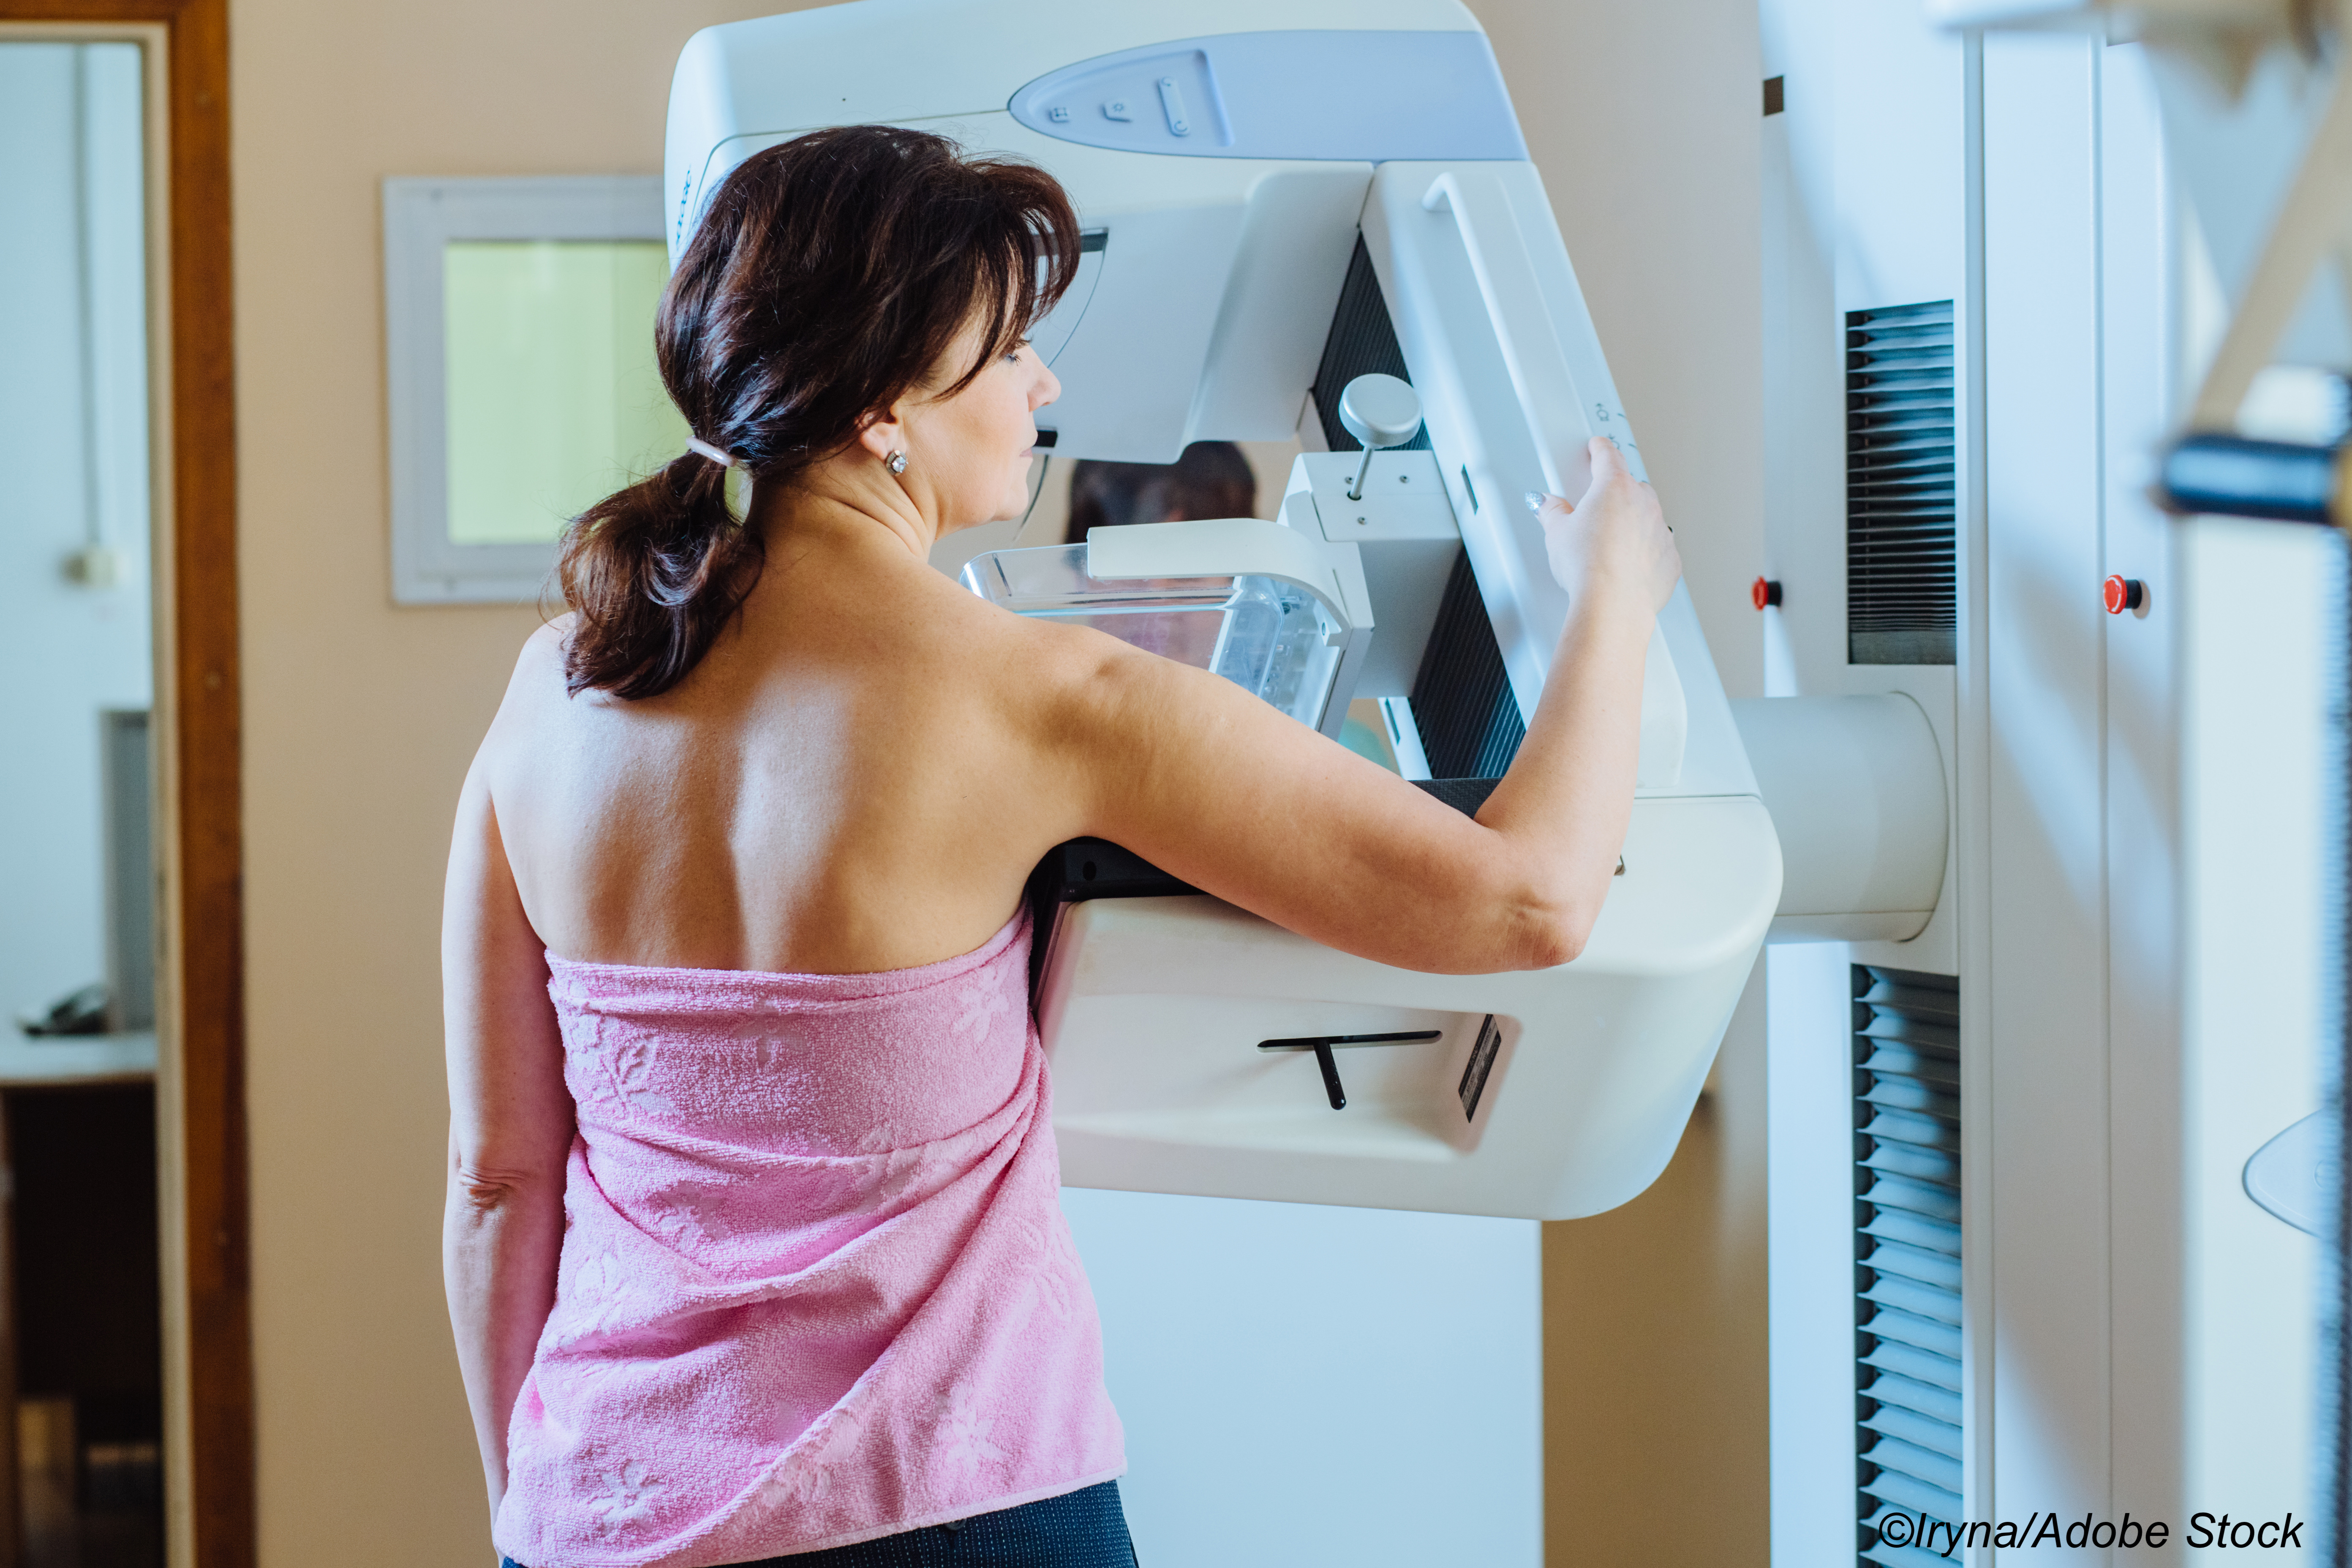 Most State-Level Plans Fail to Align with Breast Cancer Screening Recs